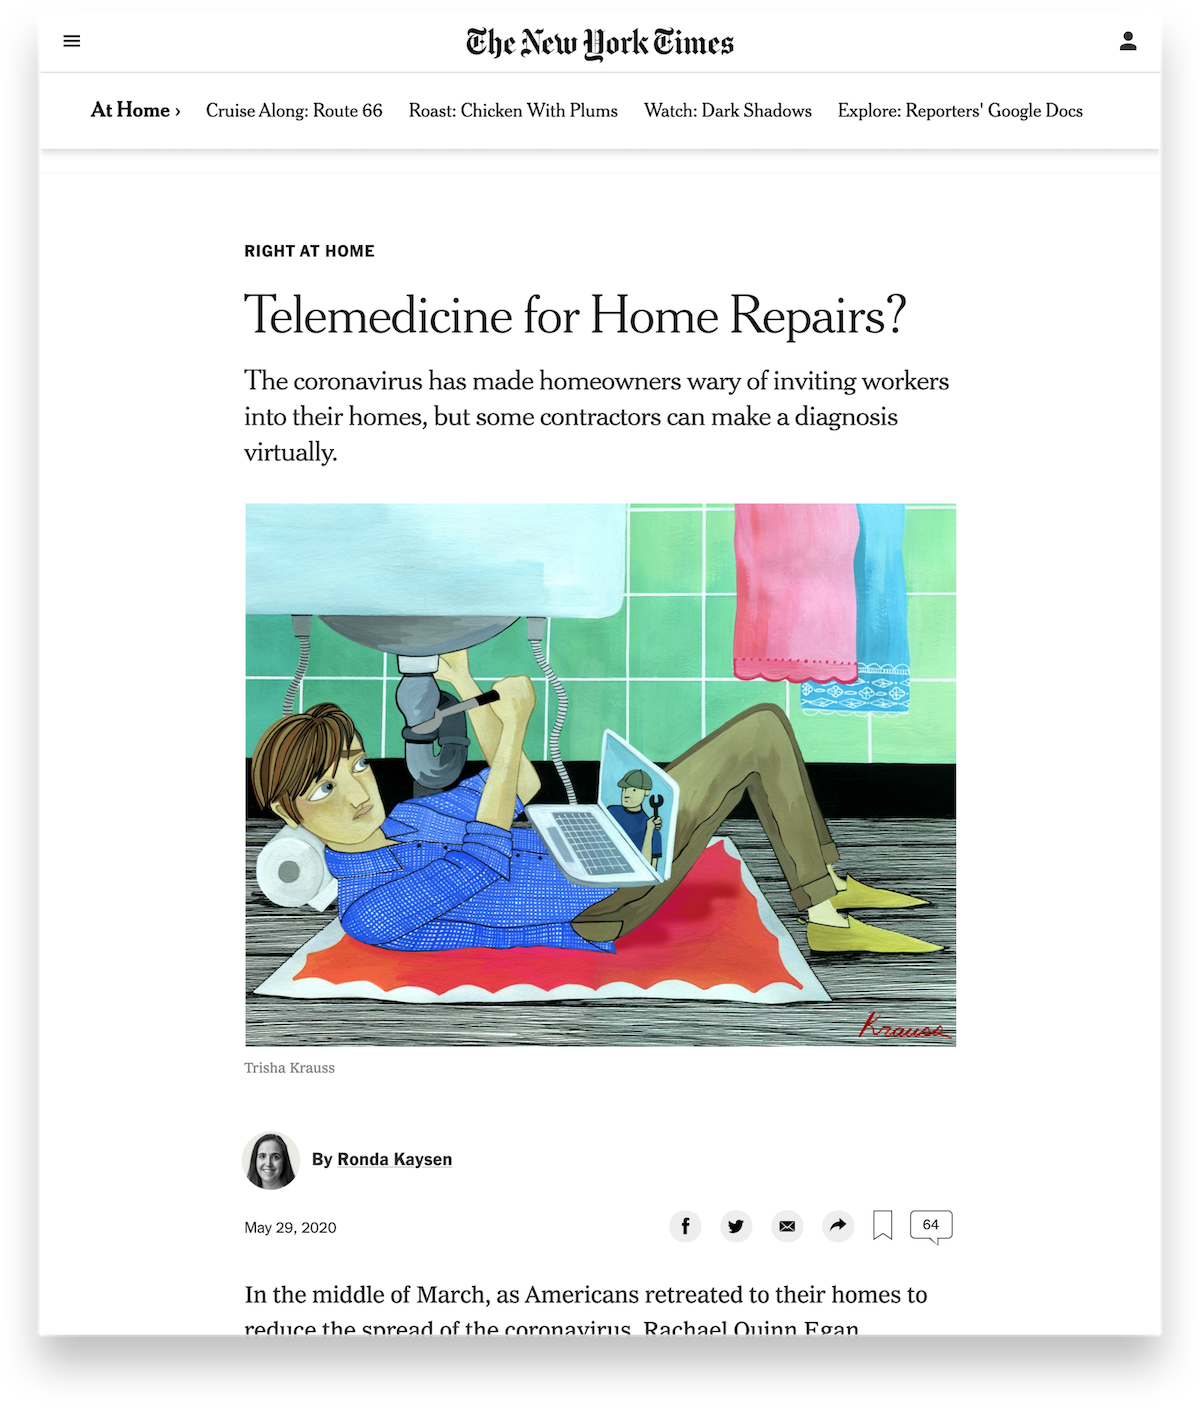 Media_NYTimes_Telemedicine-for-Home-Repairs-1